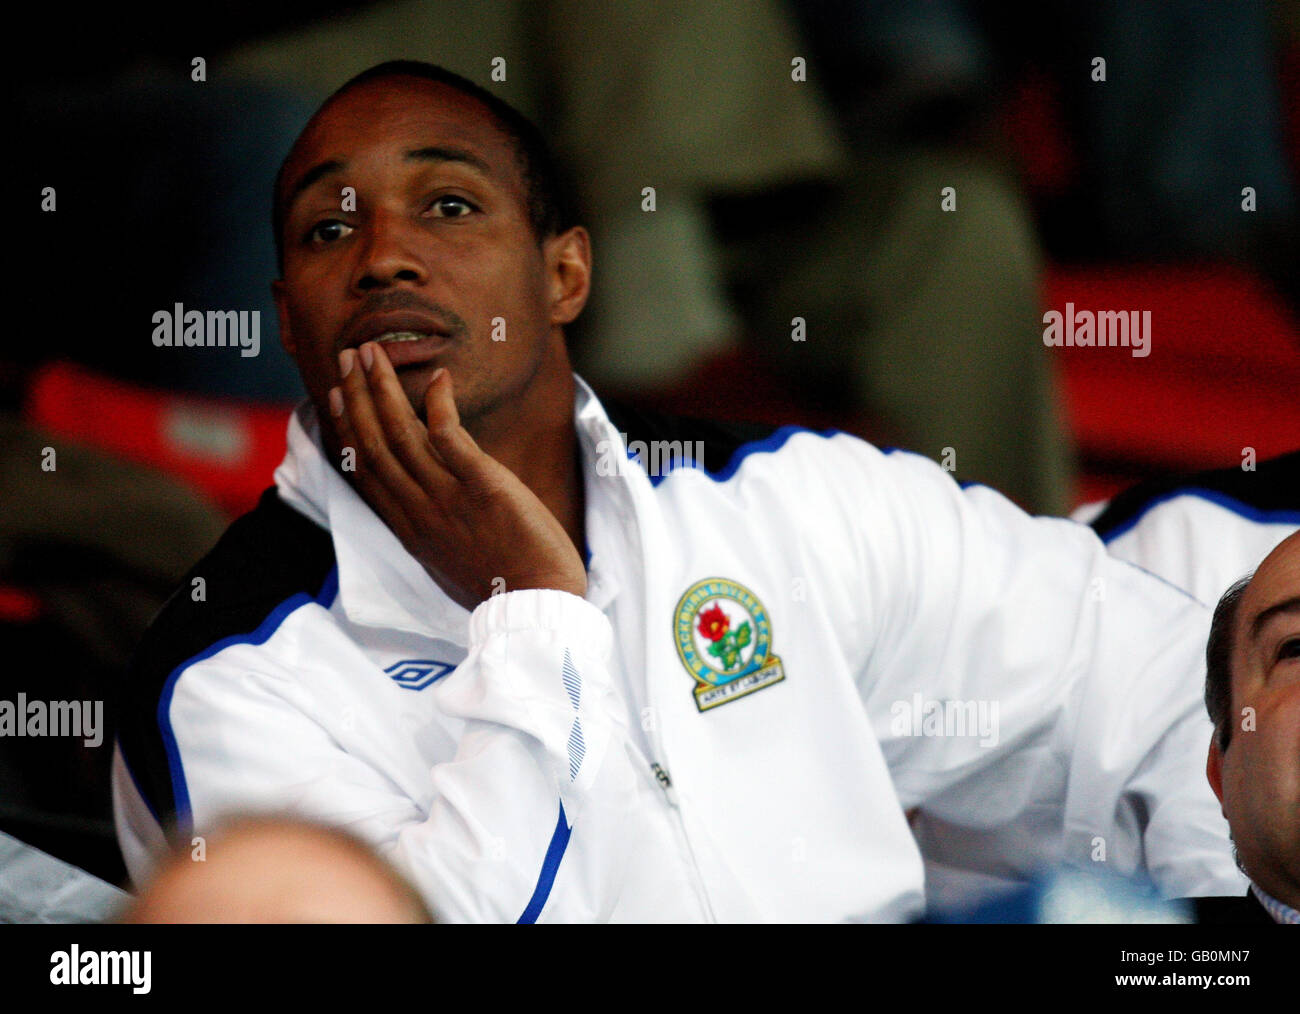 Blackburn Rovers manager Paul Ince watches the action during the Pre-Season Friendly match at the Moss Rose Stadium, Macclesfield. Stock Photo